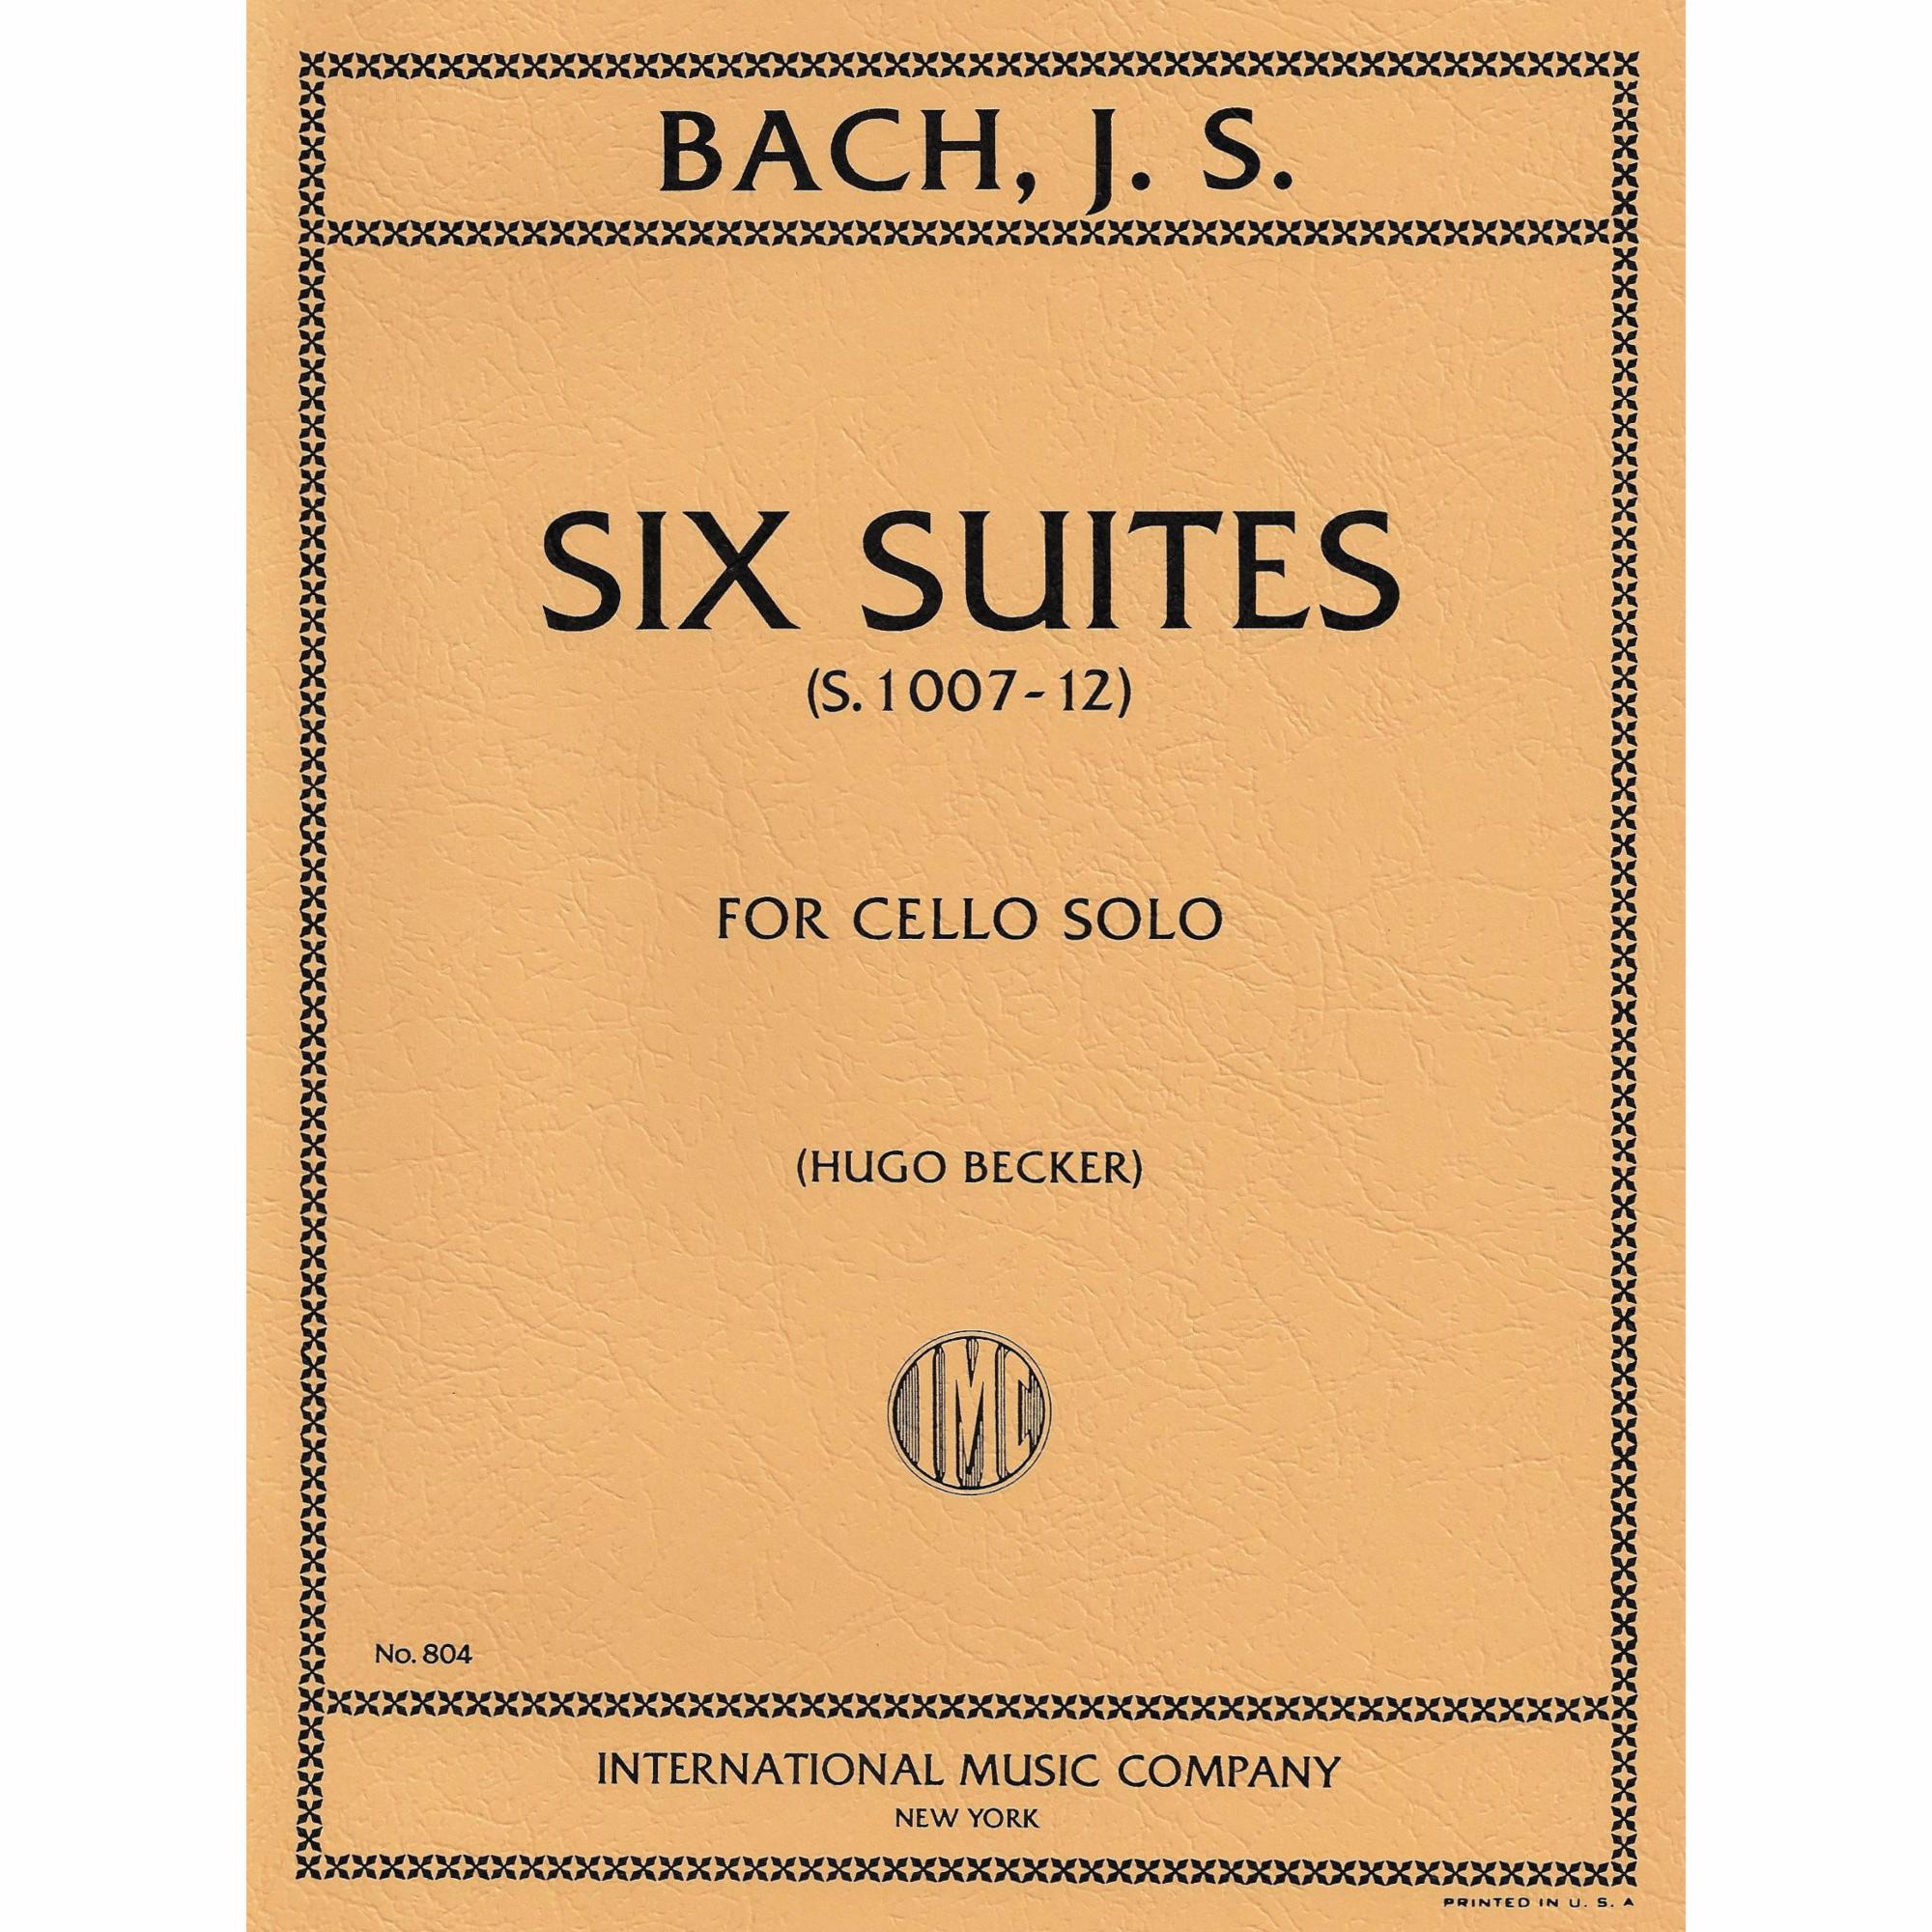 Bach -- Six Suites, S. 1007-1012 for Solo Cello